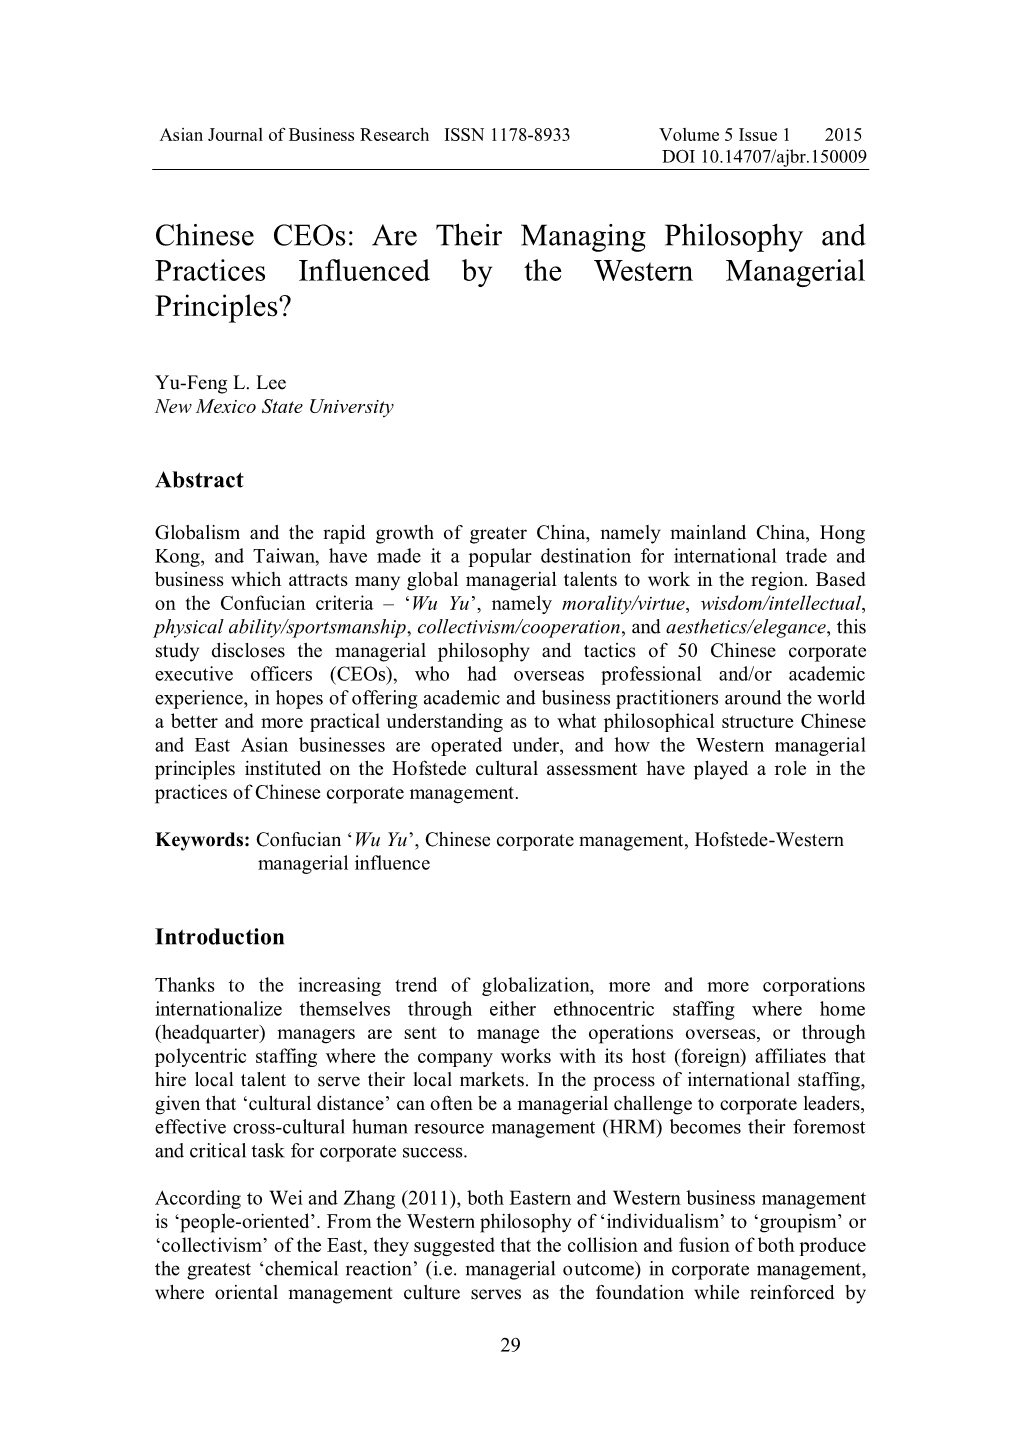 Chinese Ceos: Are Their Managing Philosophy and Practices Influenced by the Western Managerial Principles?